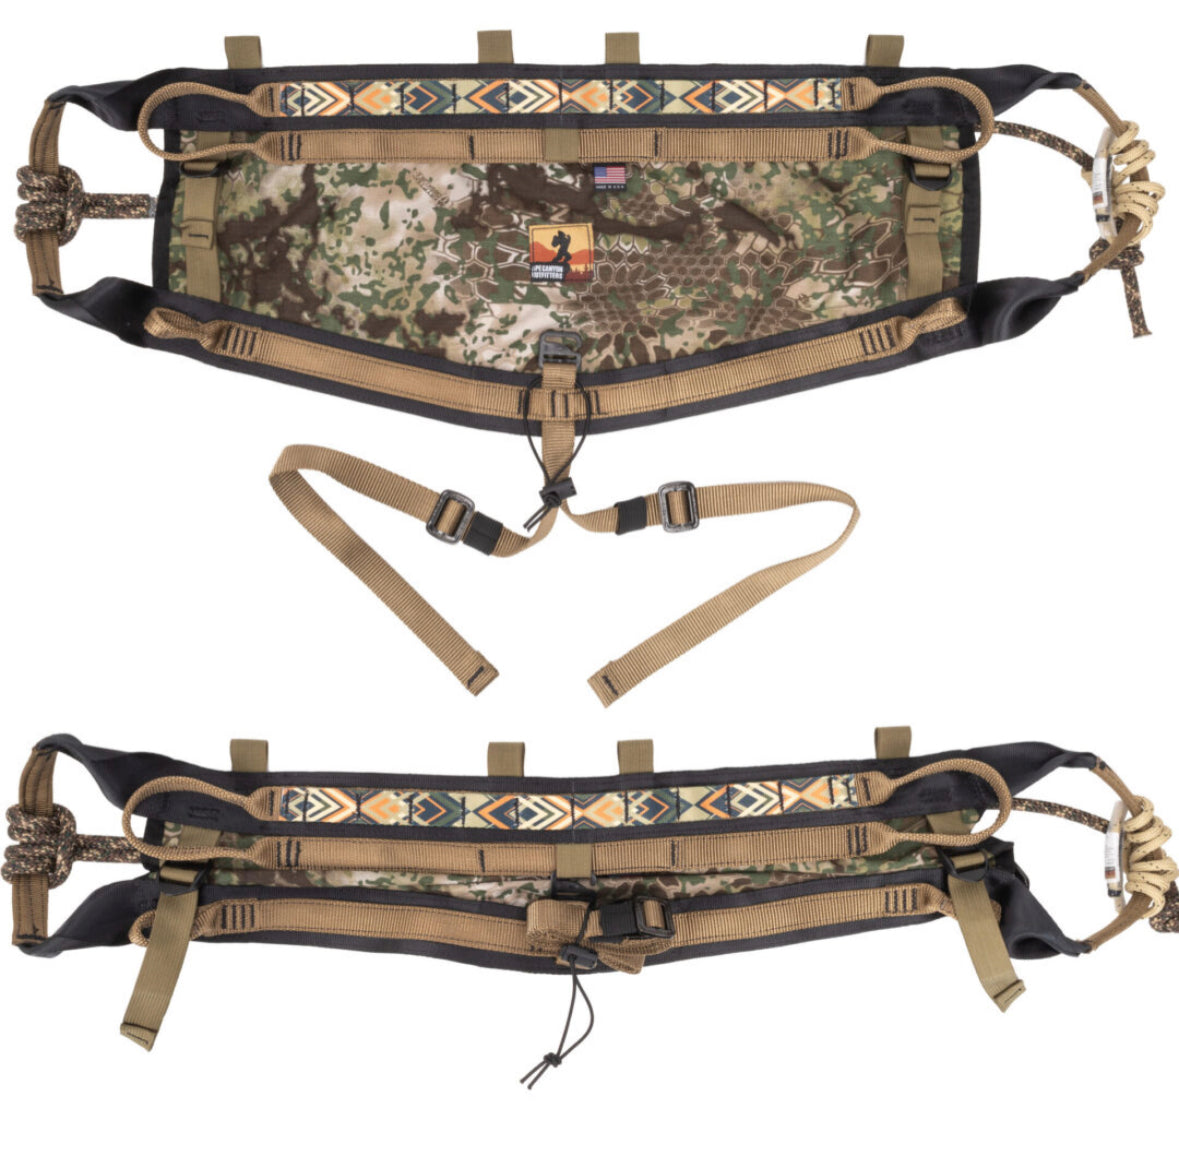 APE CANYON OUTFITTERS PIONEER SADDLE KIT OBSKURA TRANSITIONAL